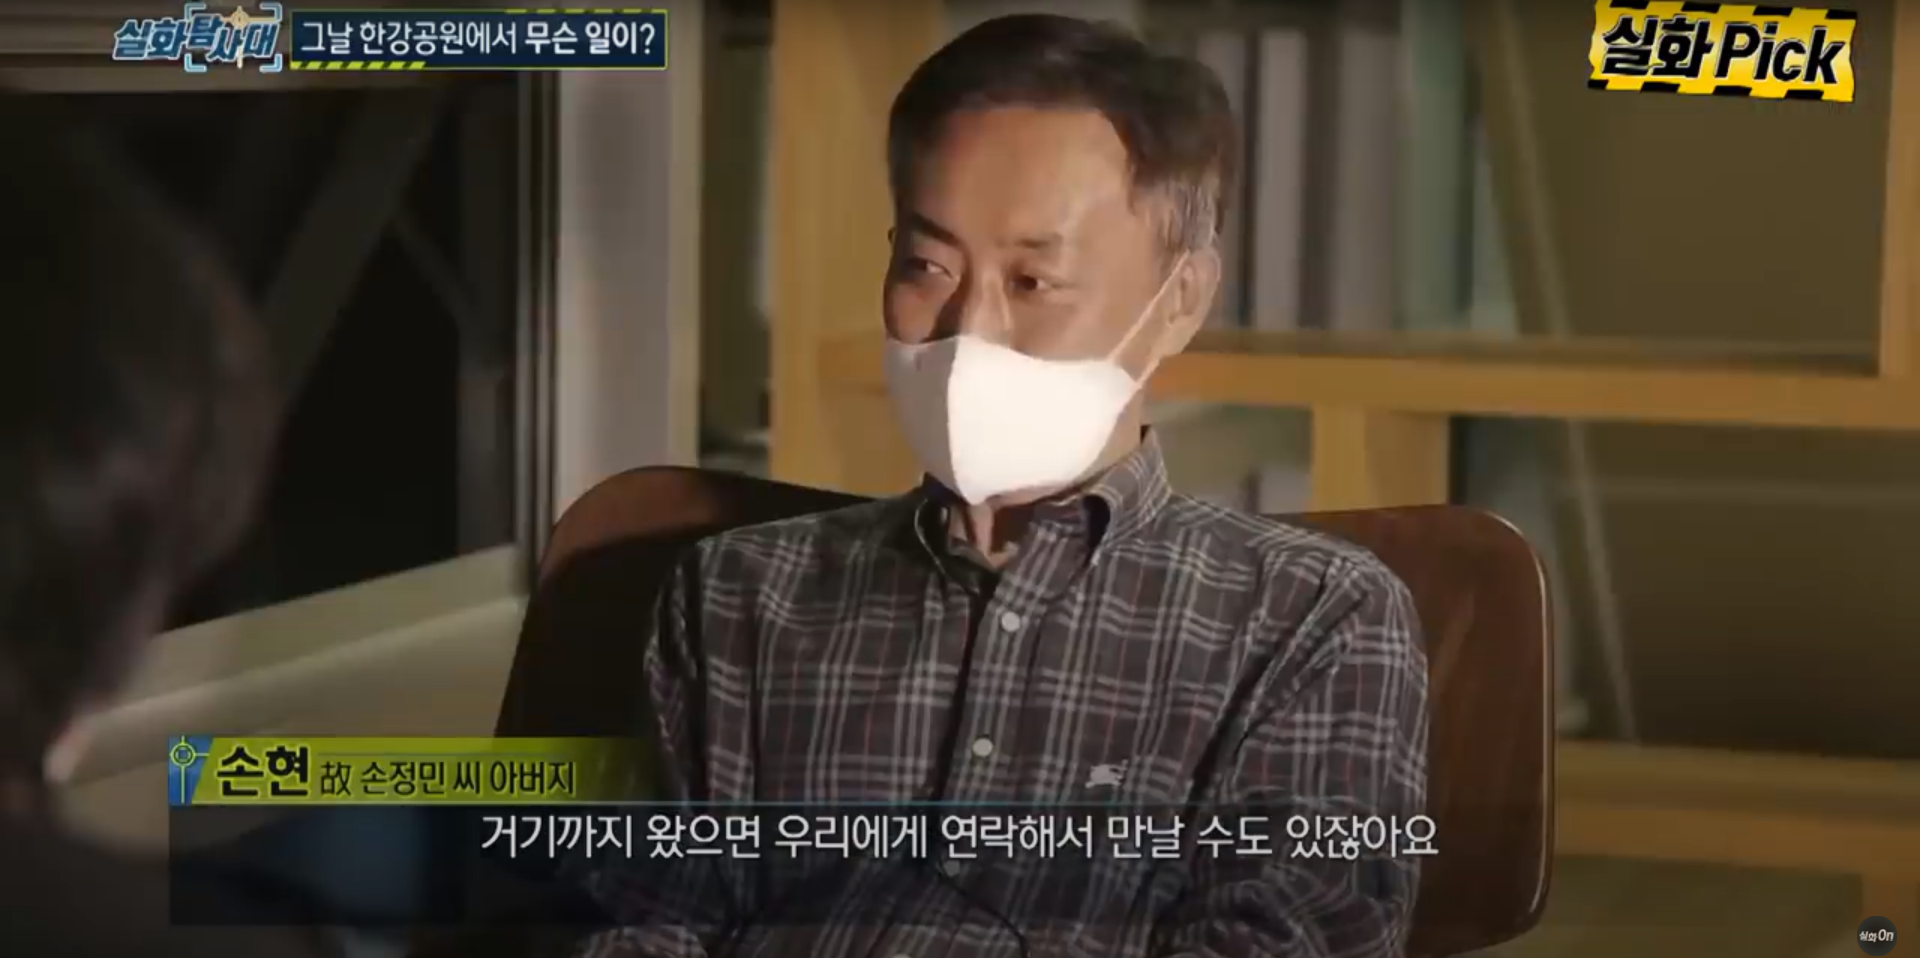 unsolved crimes in korea - jung-min's father